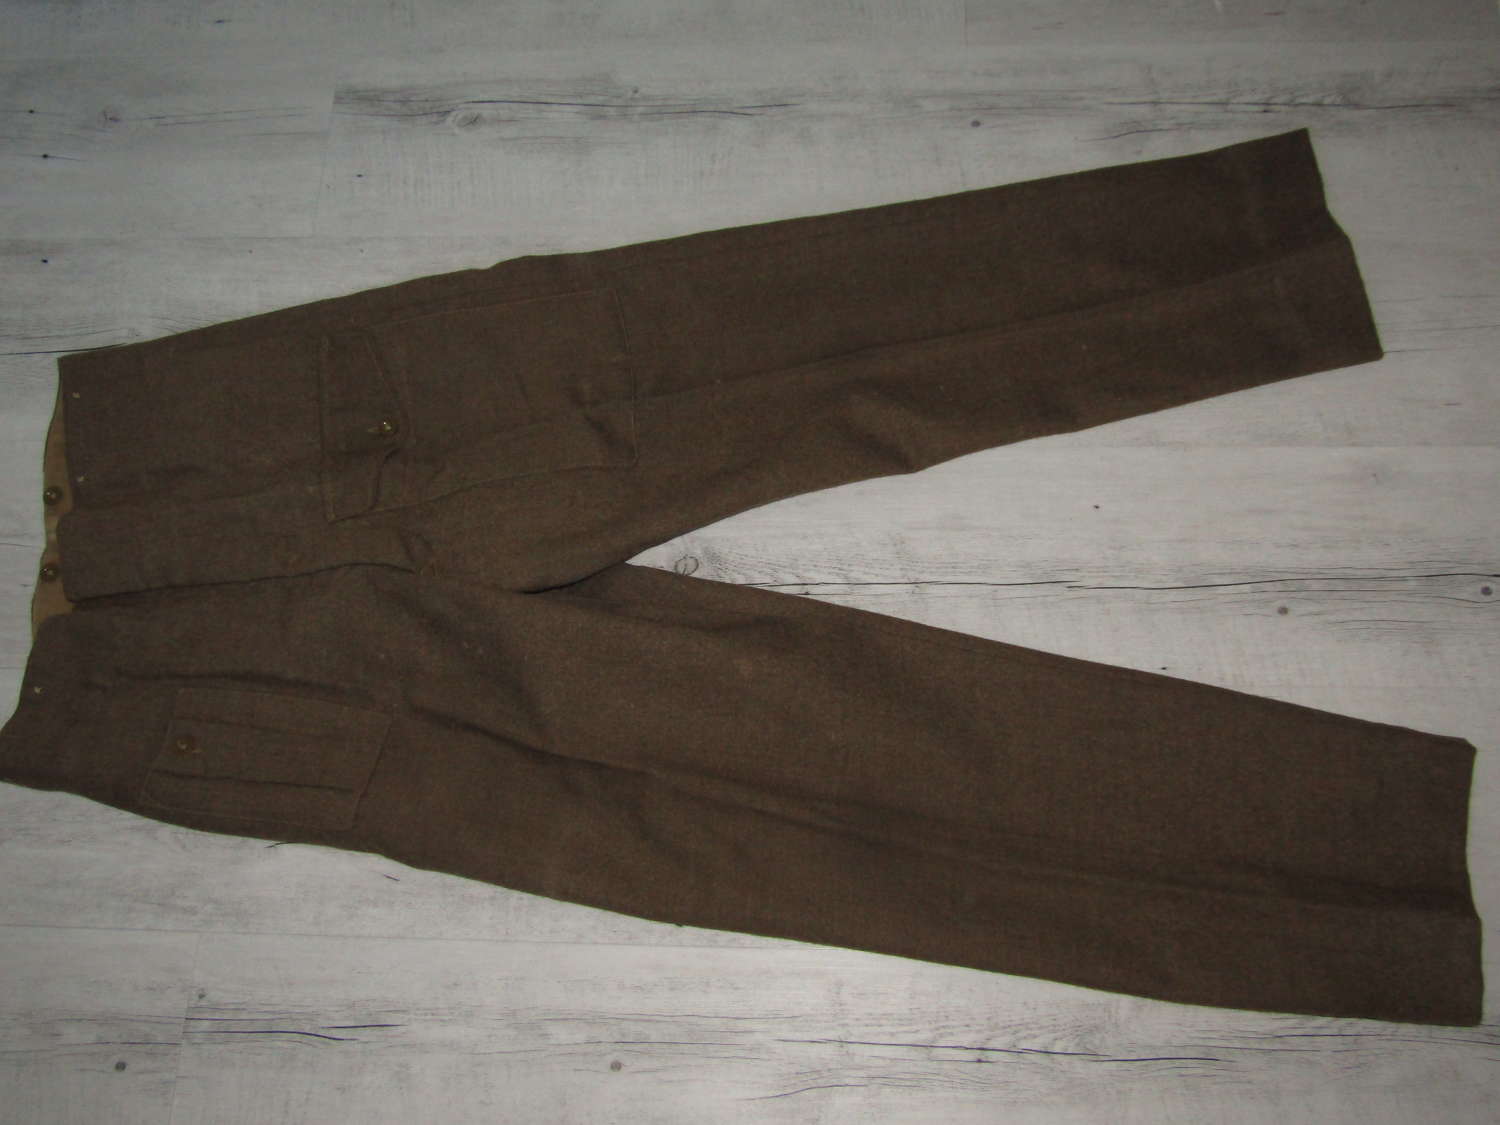 British Army Austerity Pattern BD trousers